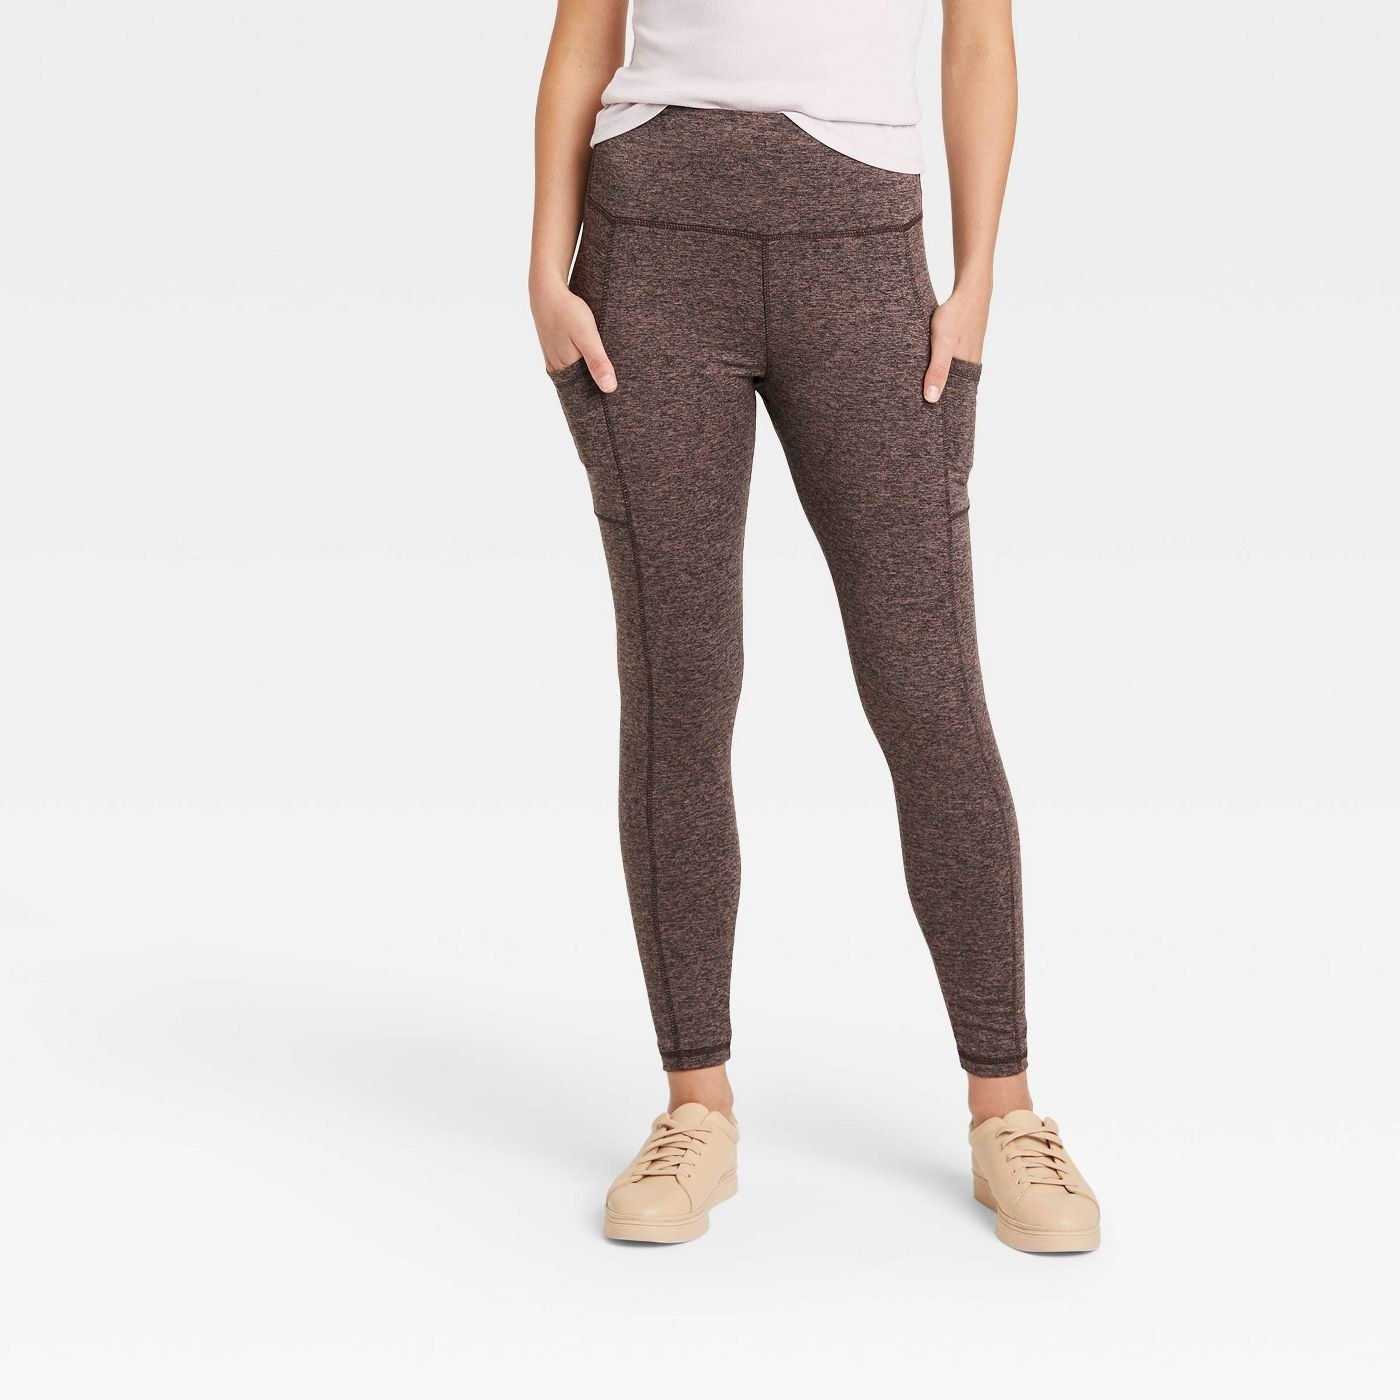 A pair of leggings with pockets